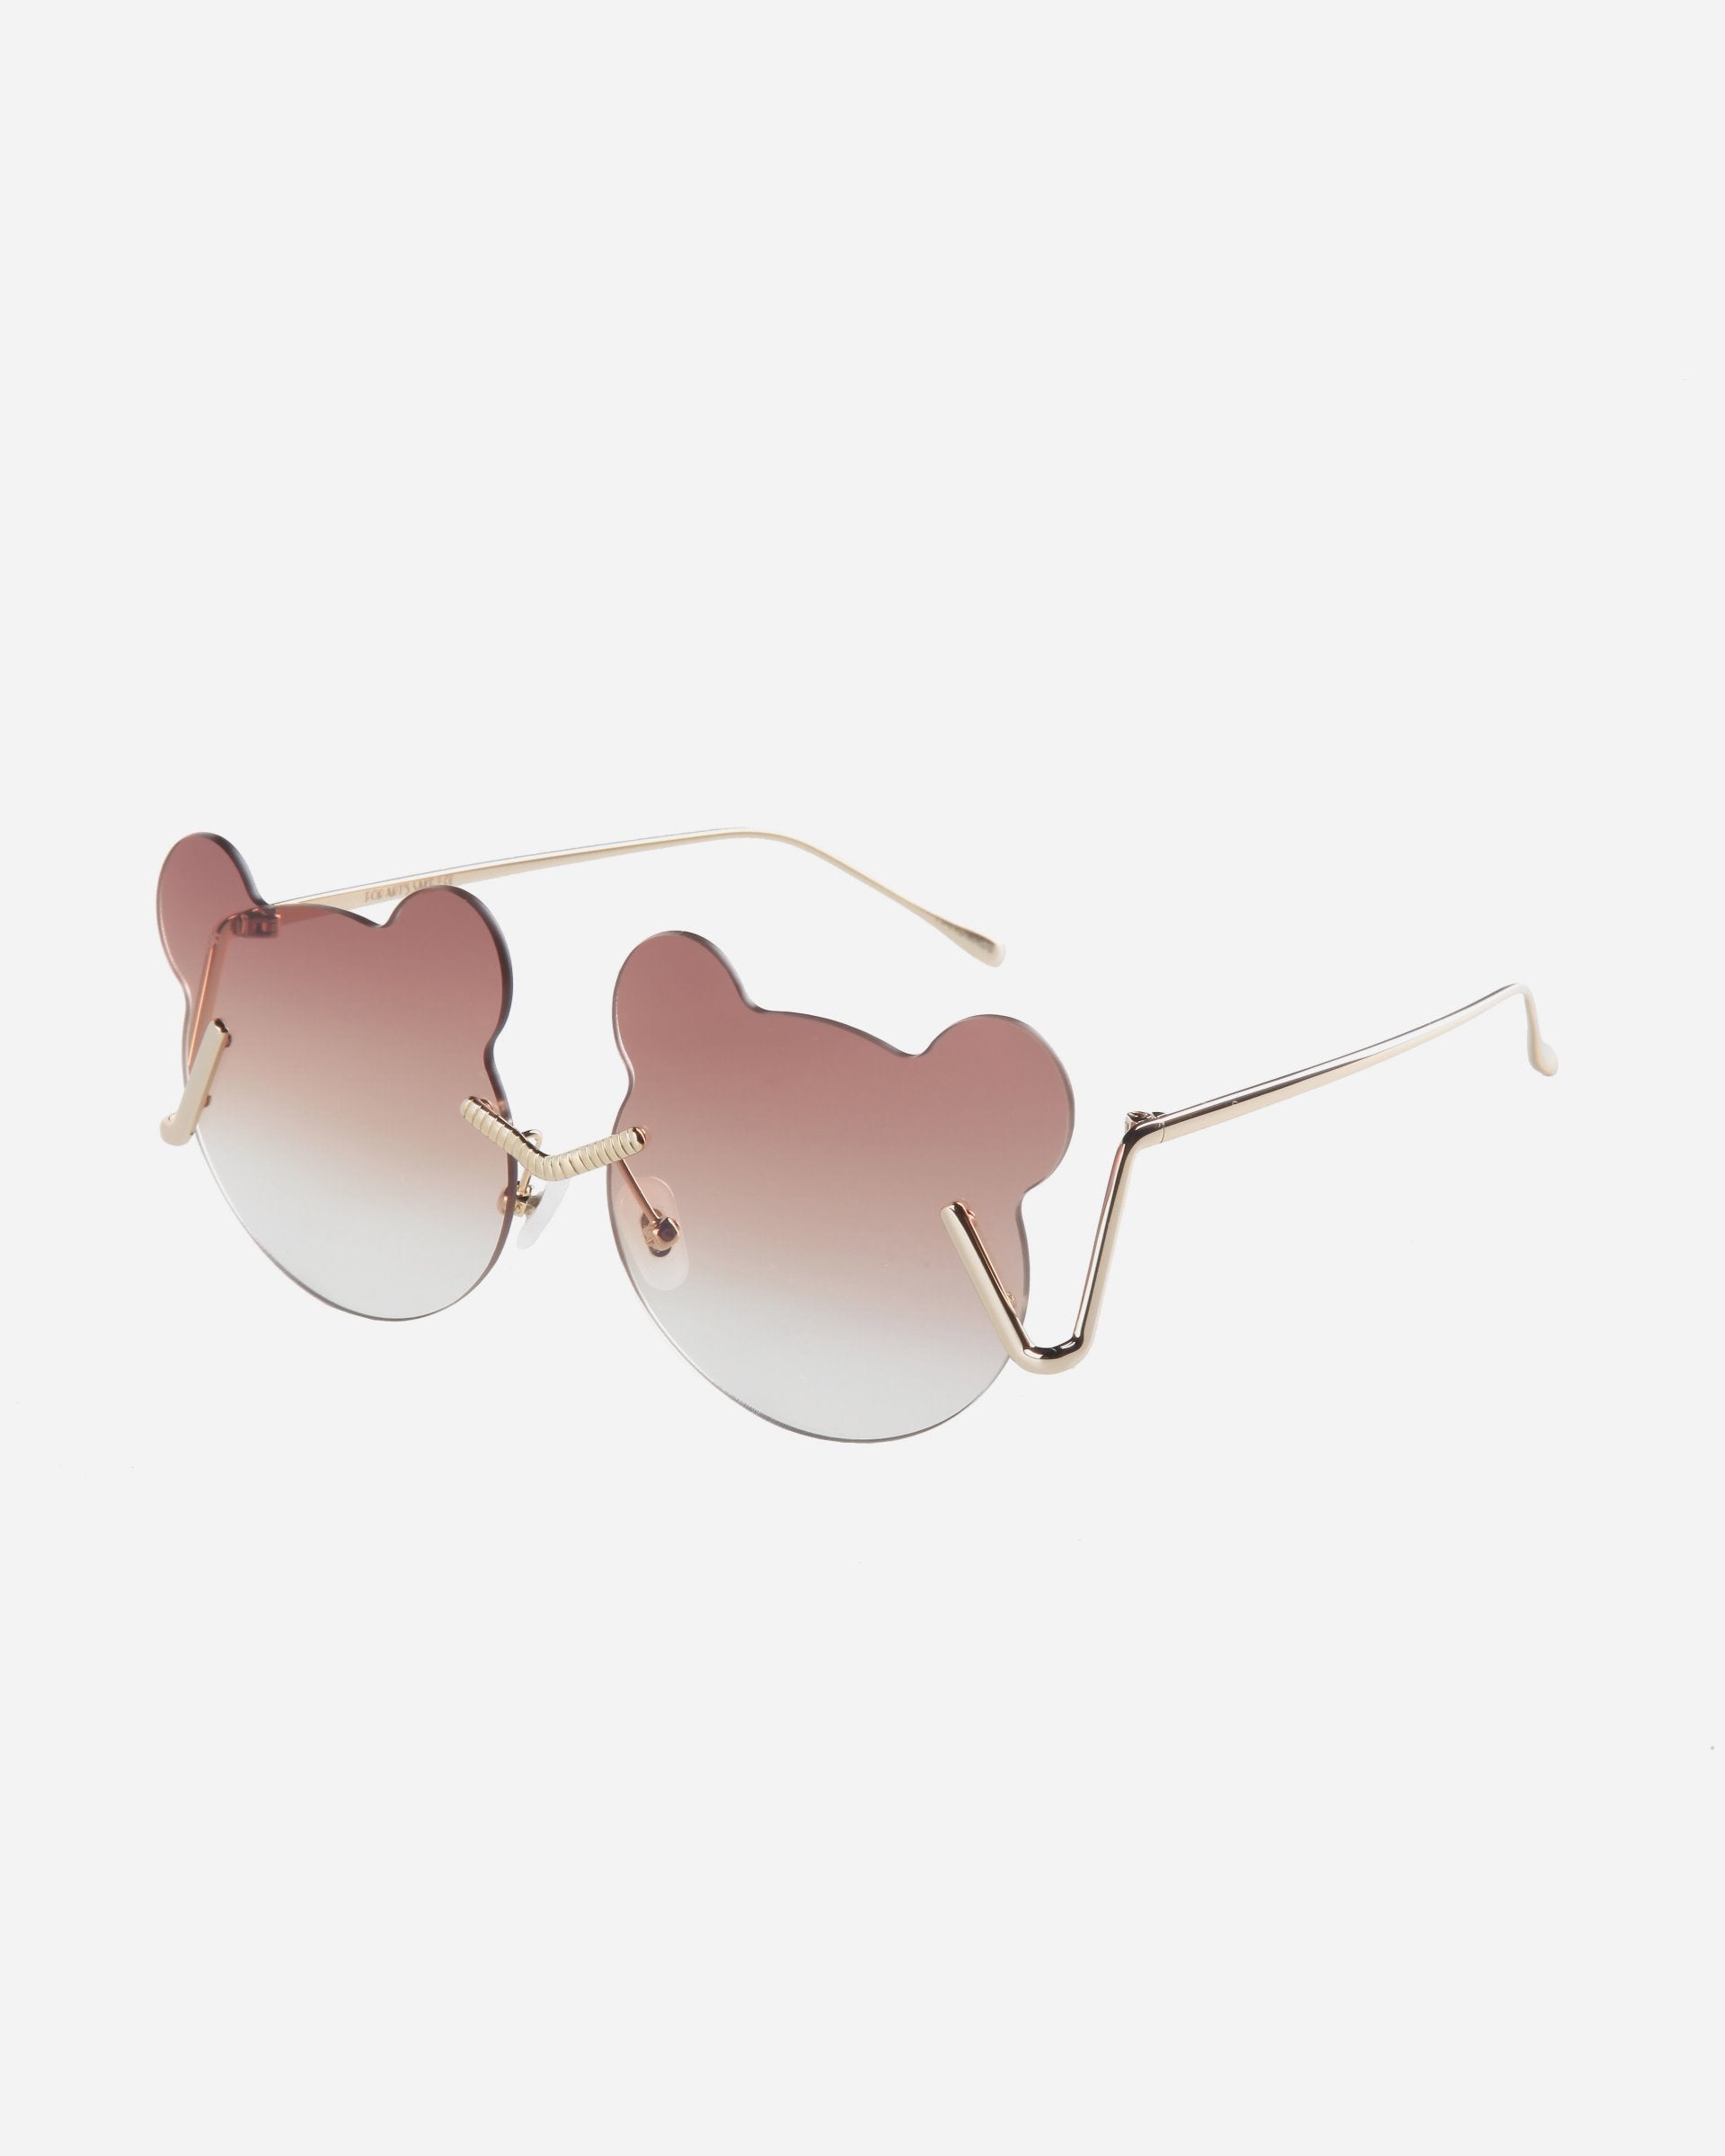 Stylish sunglasses with unique bear-head-shaped lenses featuring a gradient tint from pink to clear and thin, gold-colored stainless steel frames. The ear pieces have a subtle zigzag design near the hinges, and adjustable nosepads ensure comfort. Plus, they offer UV protection for your eyes. The Teddy by For Art's Sake® offers both style and functionality for your eyewear needs.